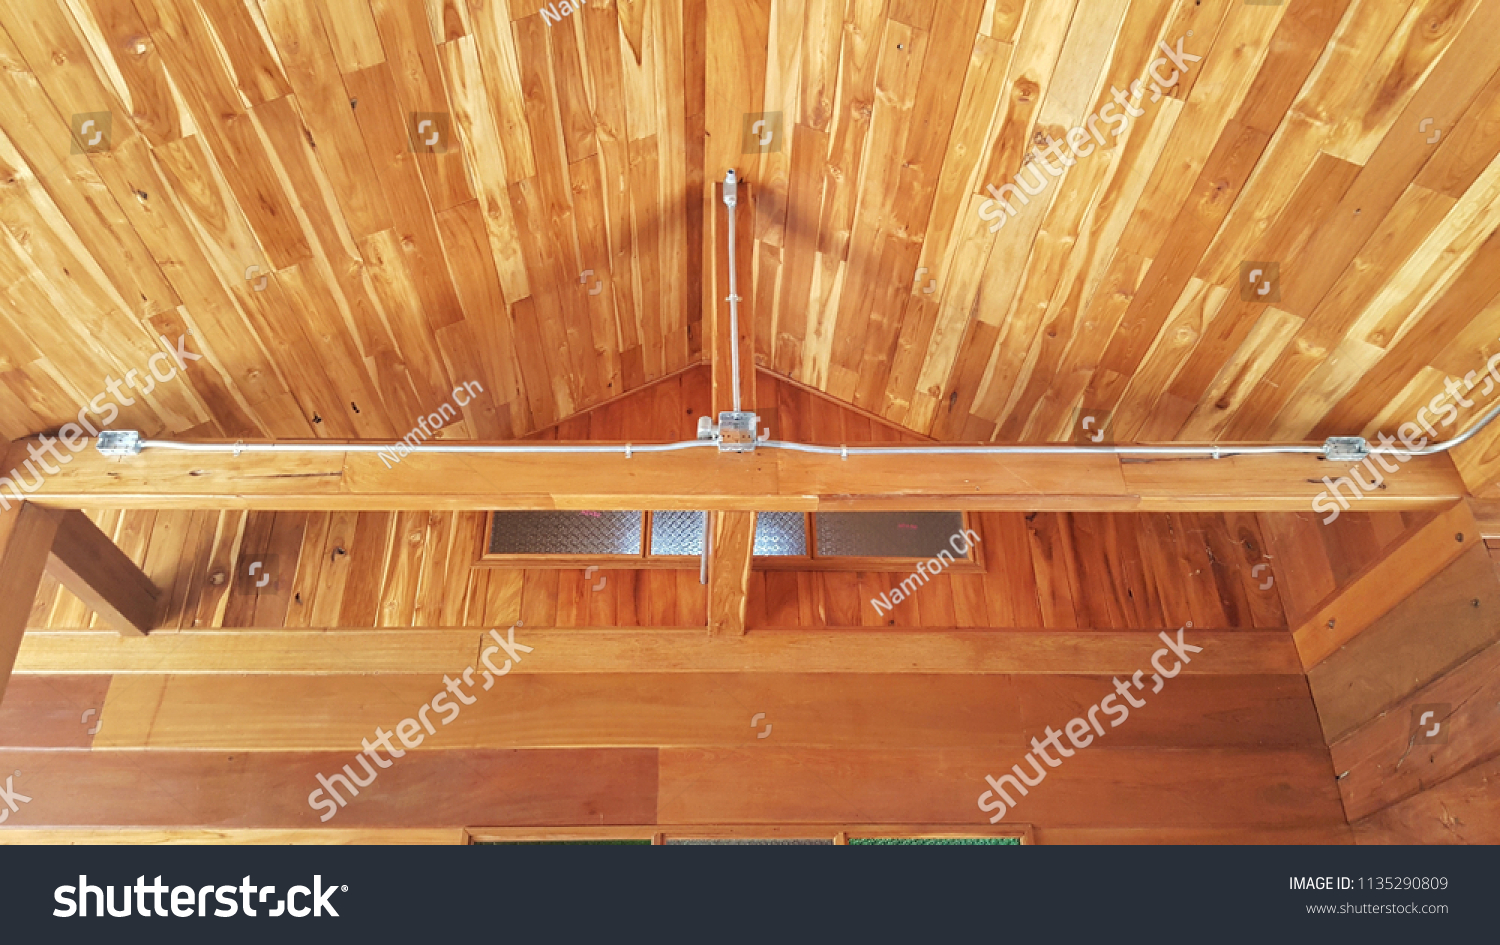 Wooden Ceiling Under Construction Electrical Fitting Stock Photo Edit Now 1135290809